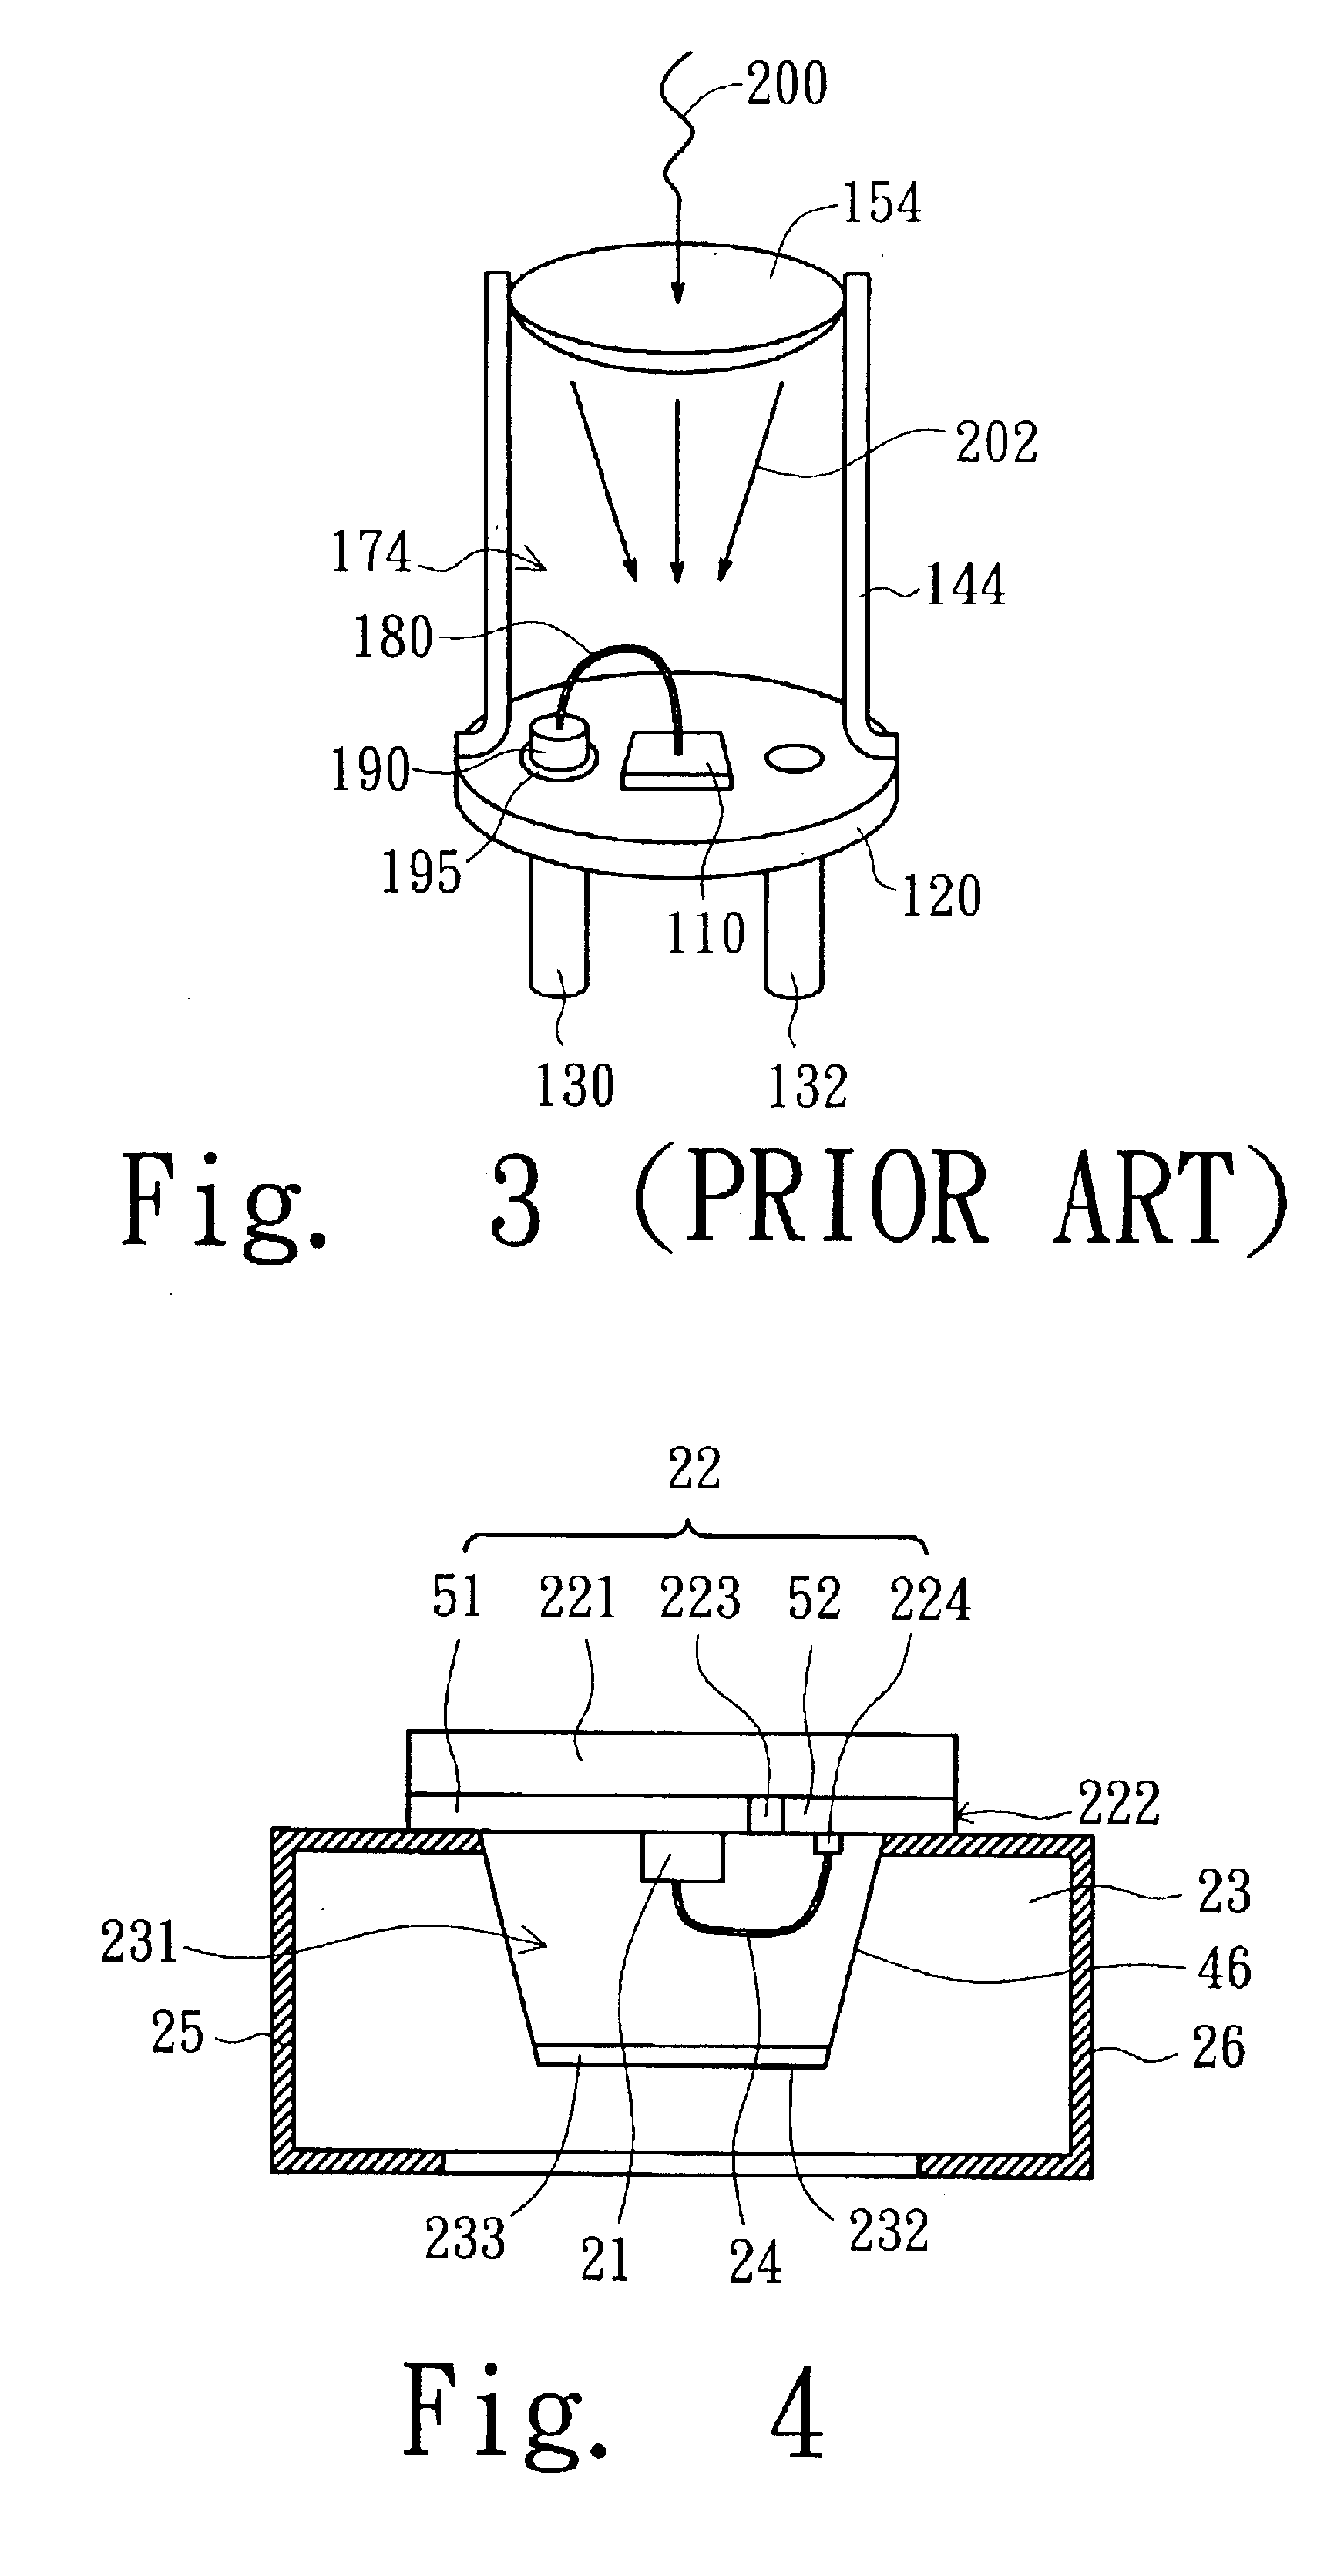 Optoelectronic device with reflective surface